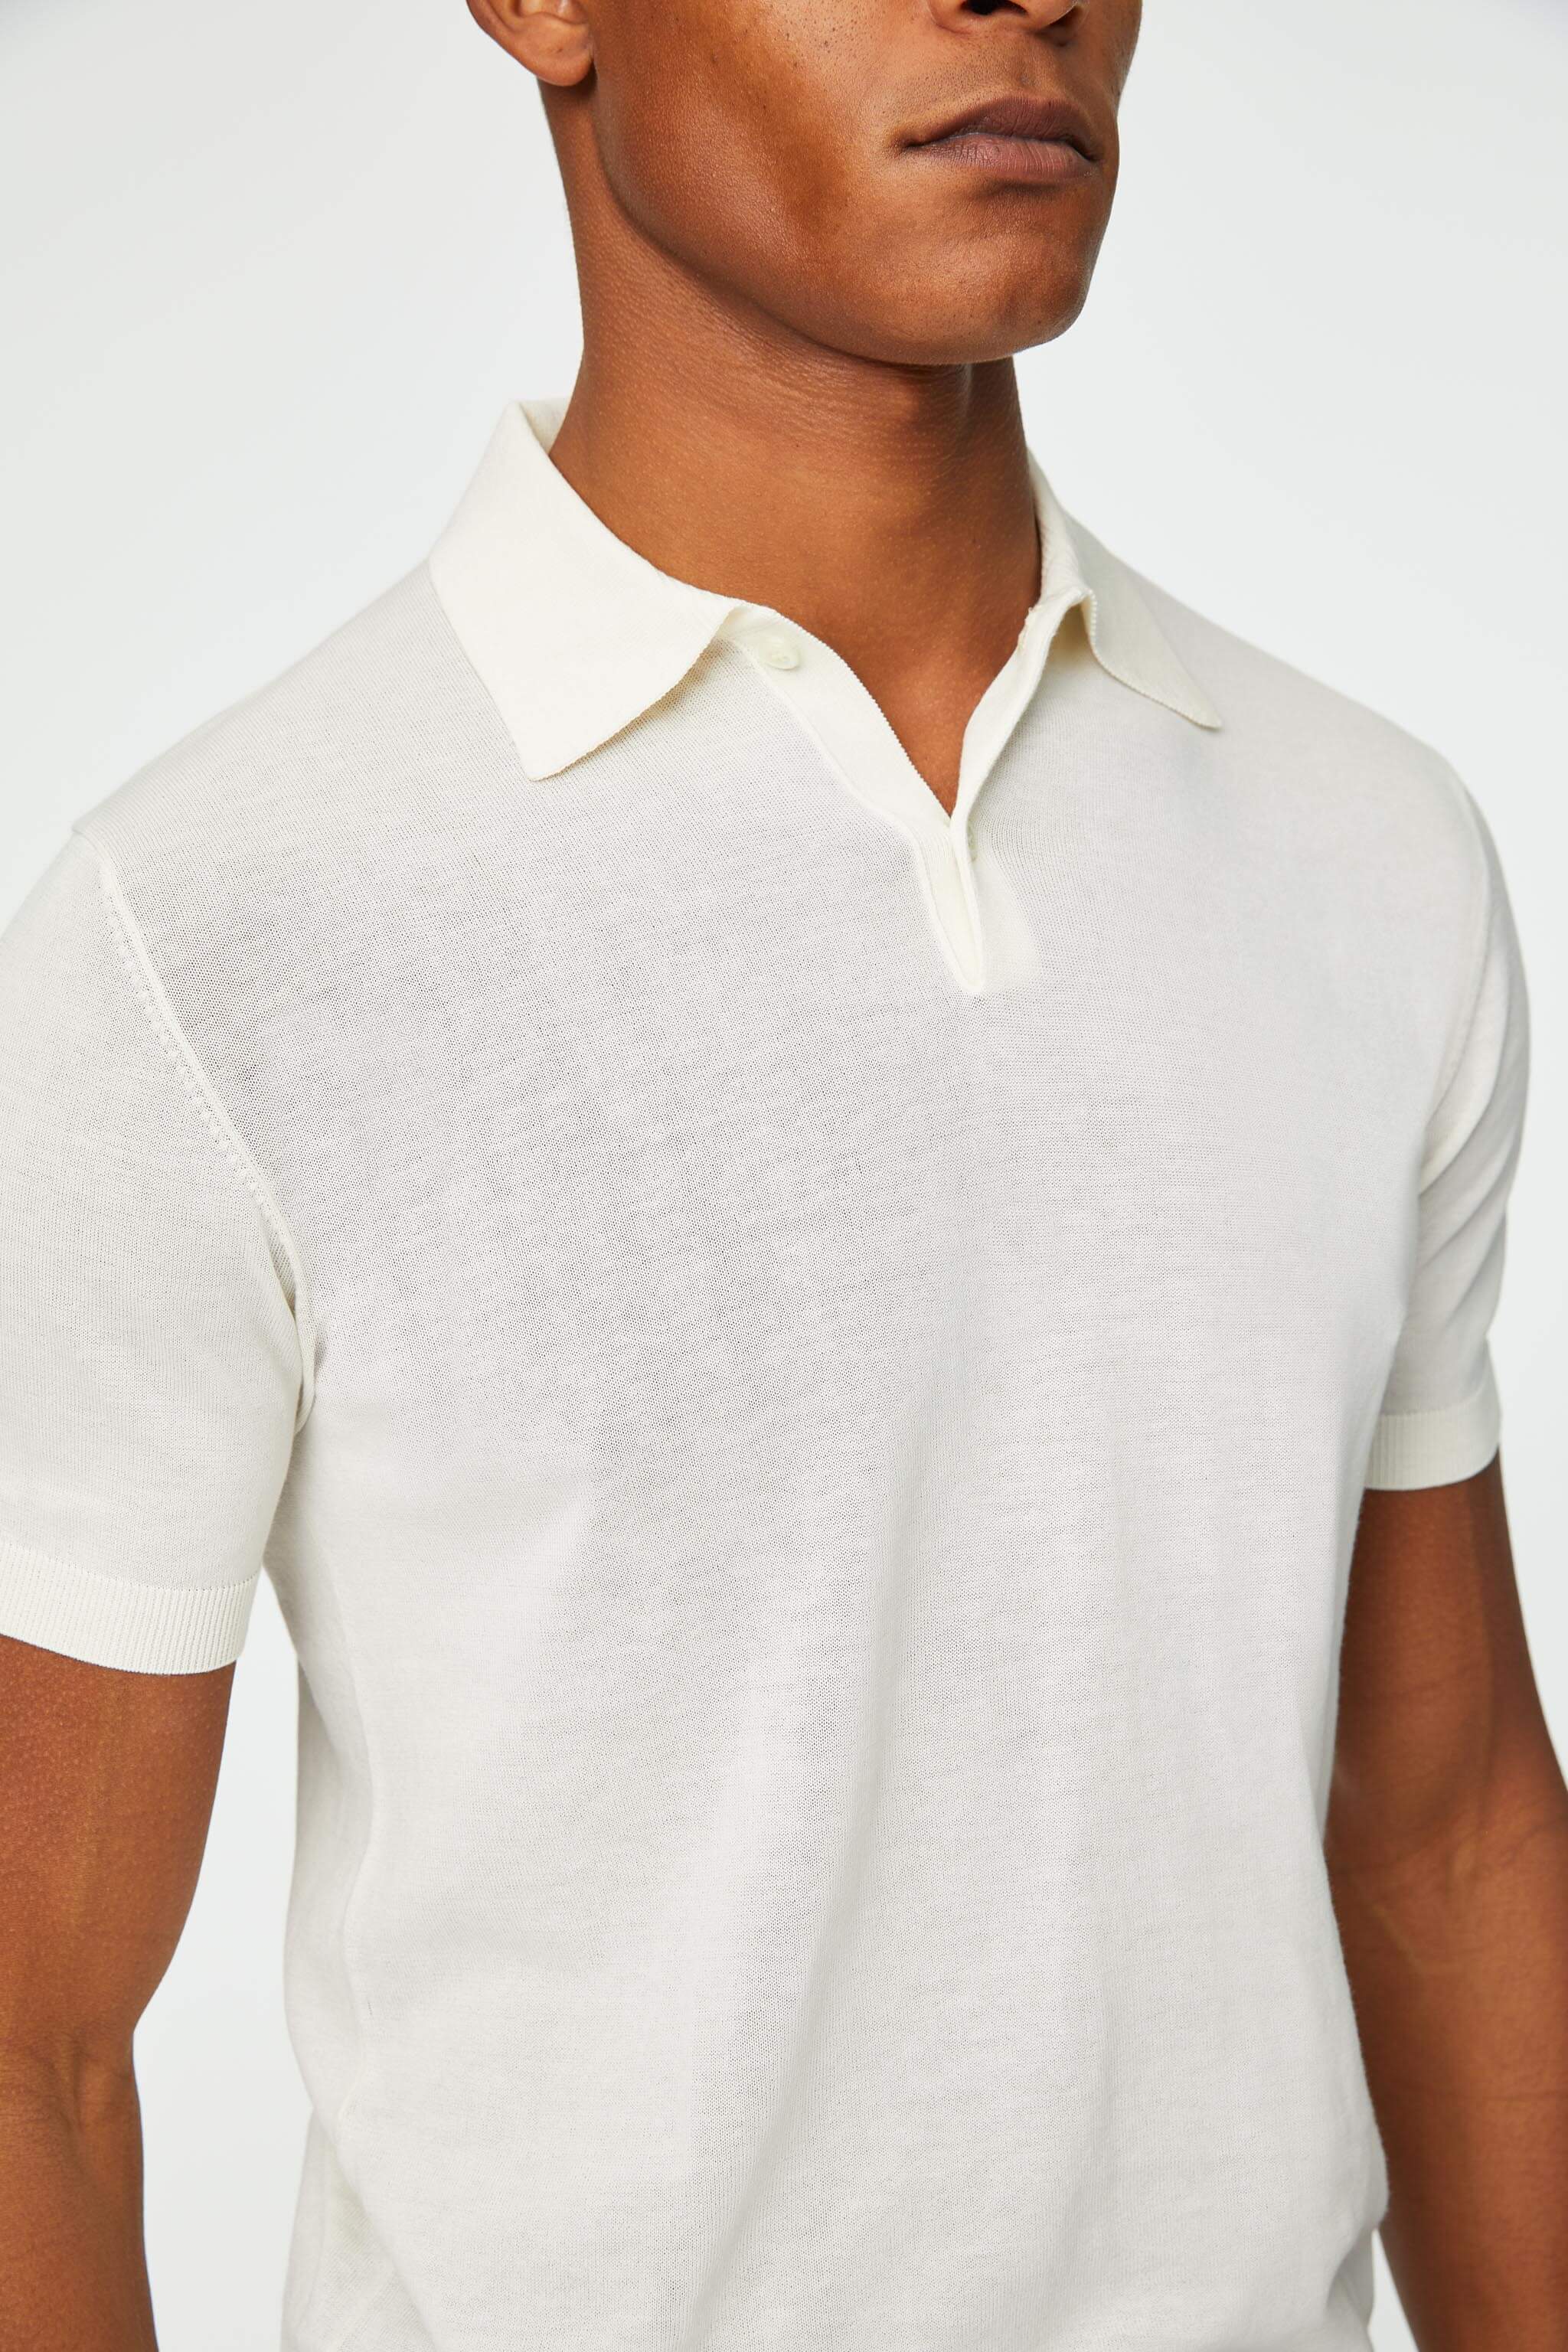 Short-sleeve knit Polo in milky white